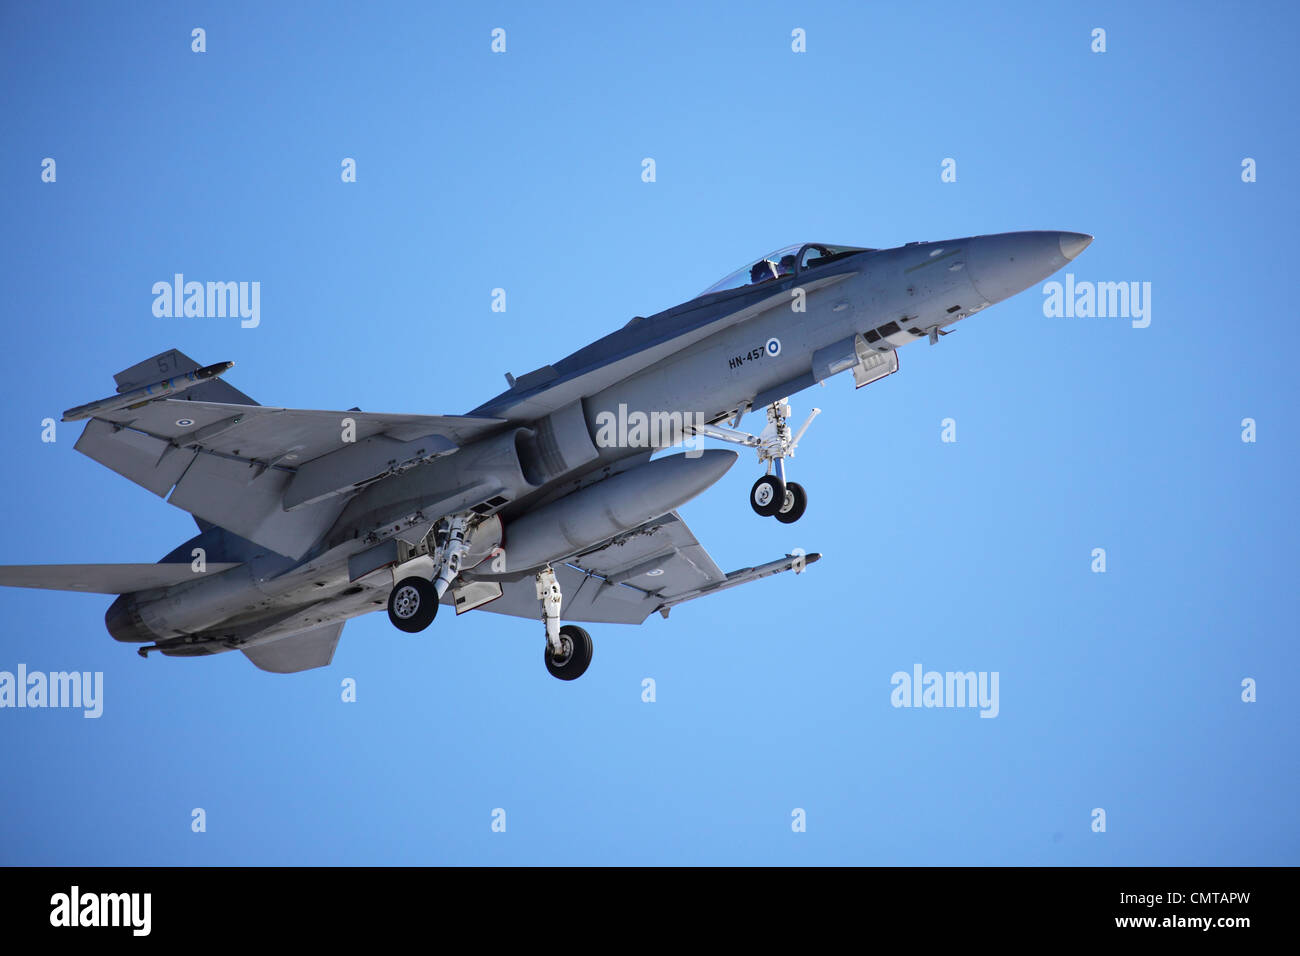 A McDonnell Douglas F/A-18 Hornet multi-role fighter aircraft. Stock Photo